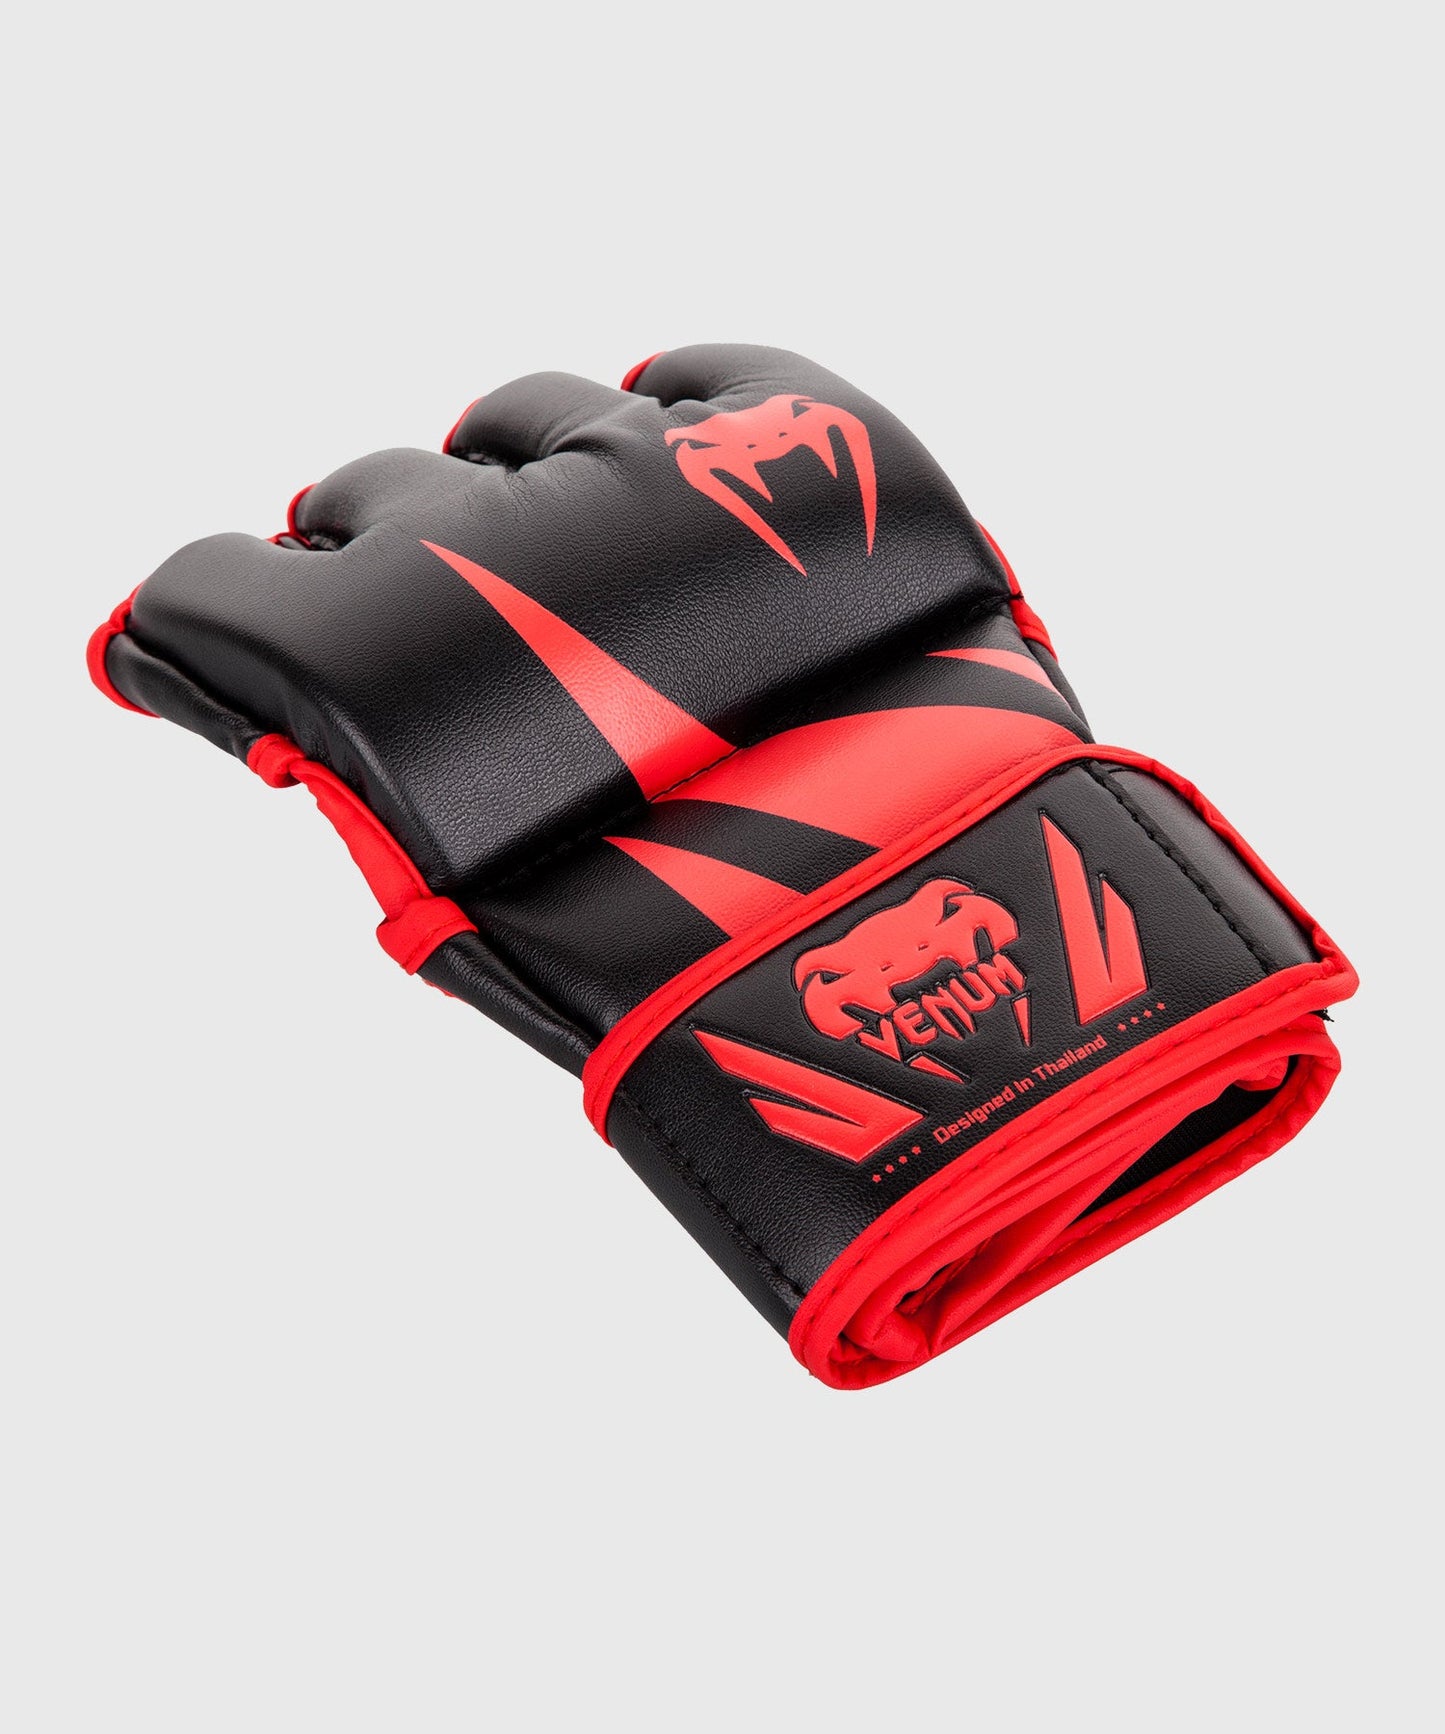 Venum Challenger MMA Gloves - Without Thumb - Black/Red